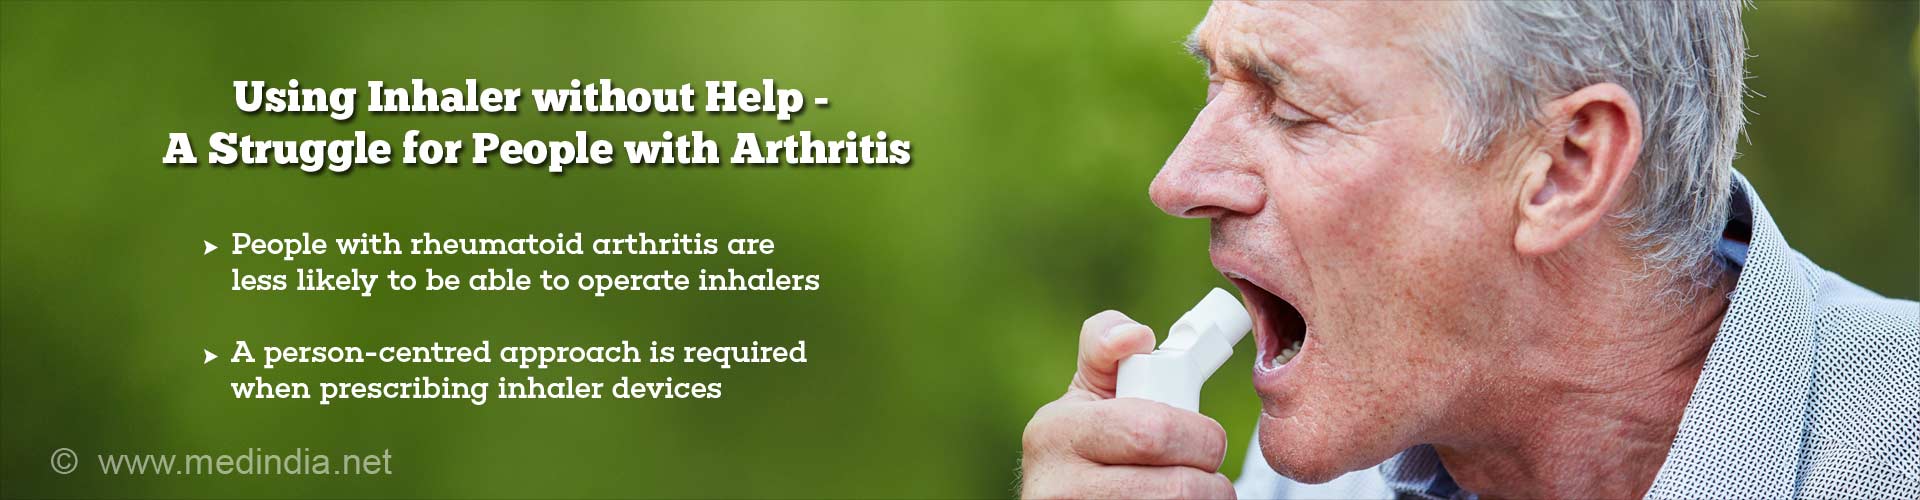 using inhaler without help - a struggle for people with arthritis
- people with rheumatoid arthritis are less likely to be able to operate inhalers
- a person-centered approach is required when prescribing inhaler devices